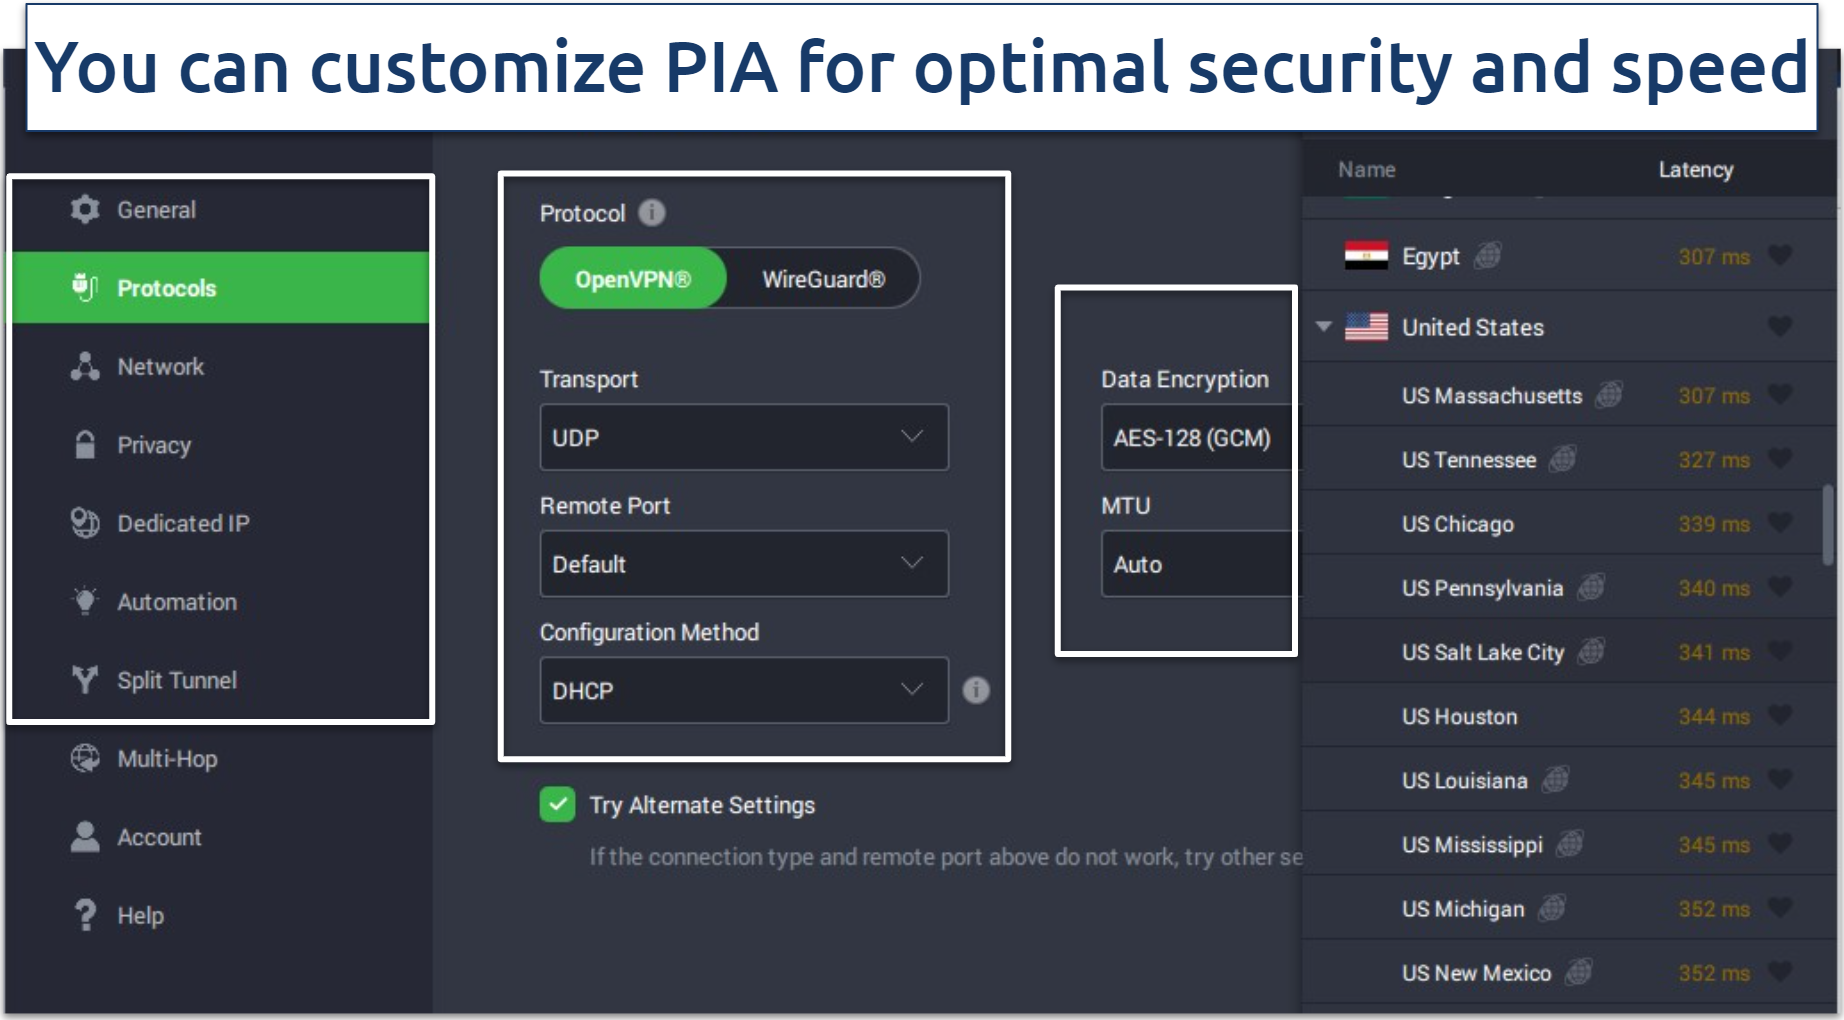 A screenshot of the security settings on the PIA Windows app